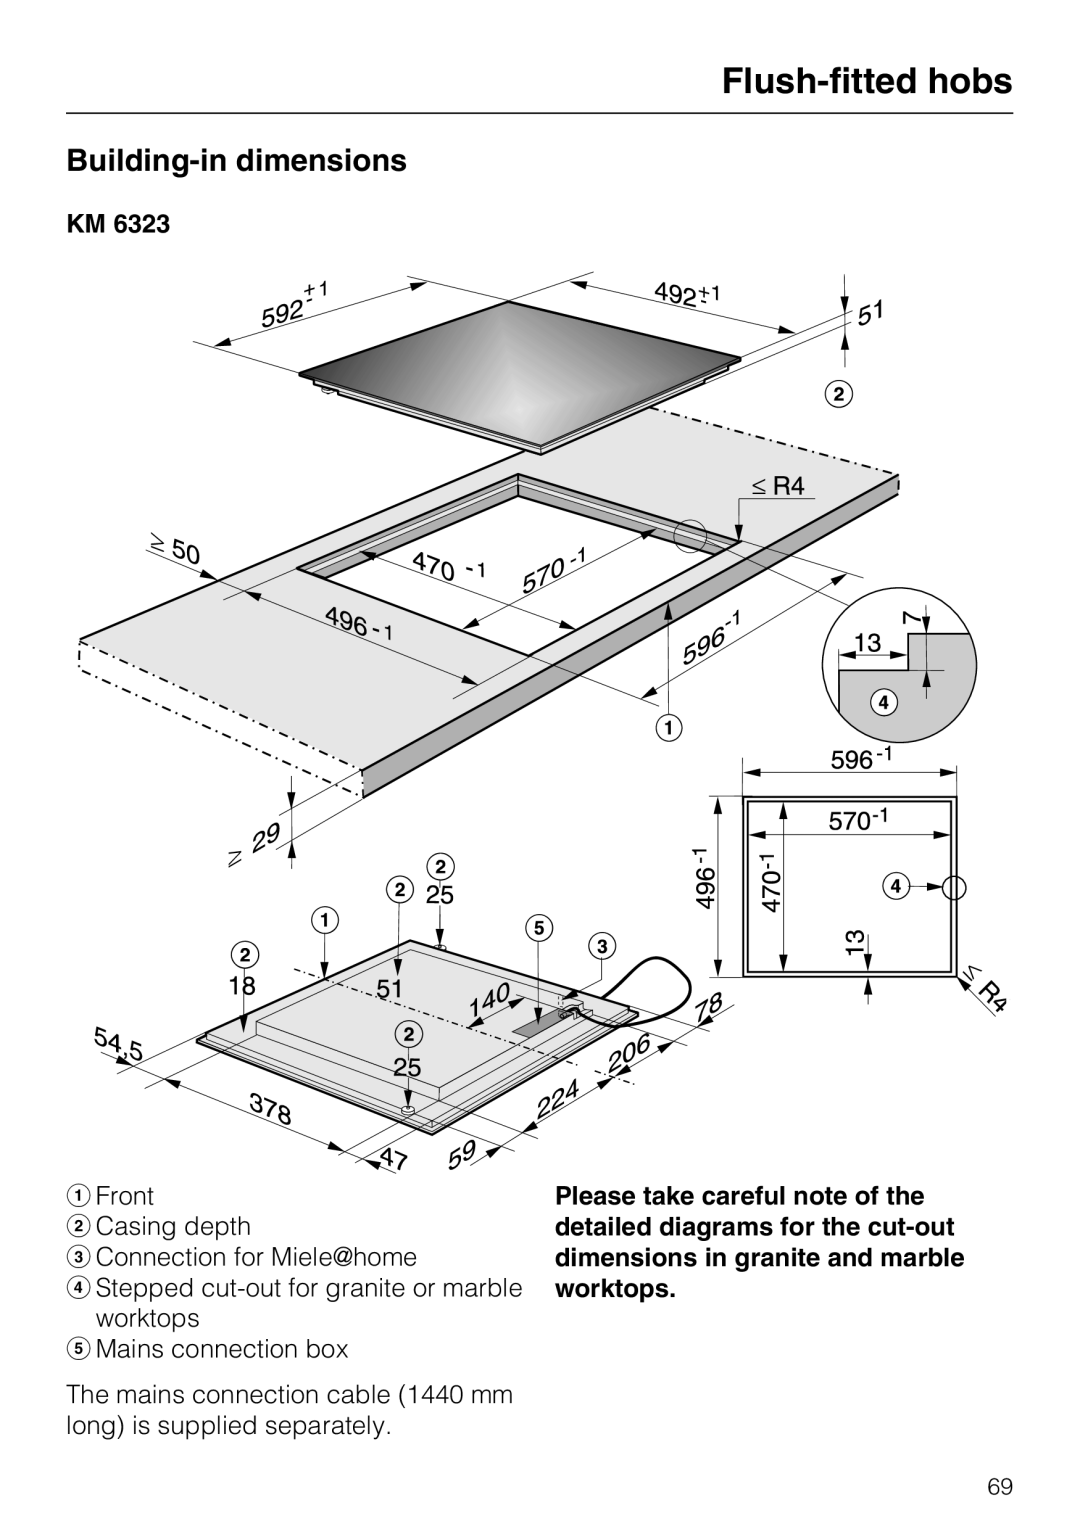 Miele KM6347 Flush-fitted hobs, Building-in dimensions, Please take careful note of the, detailed diagrams for the cut-out 